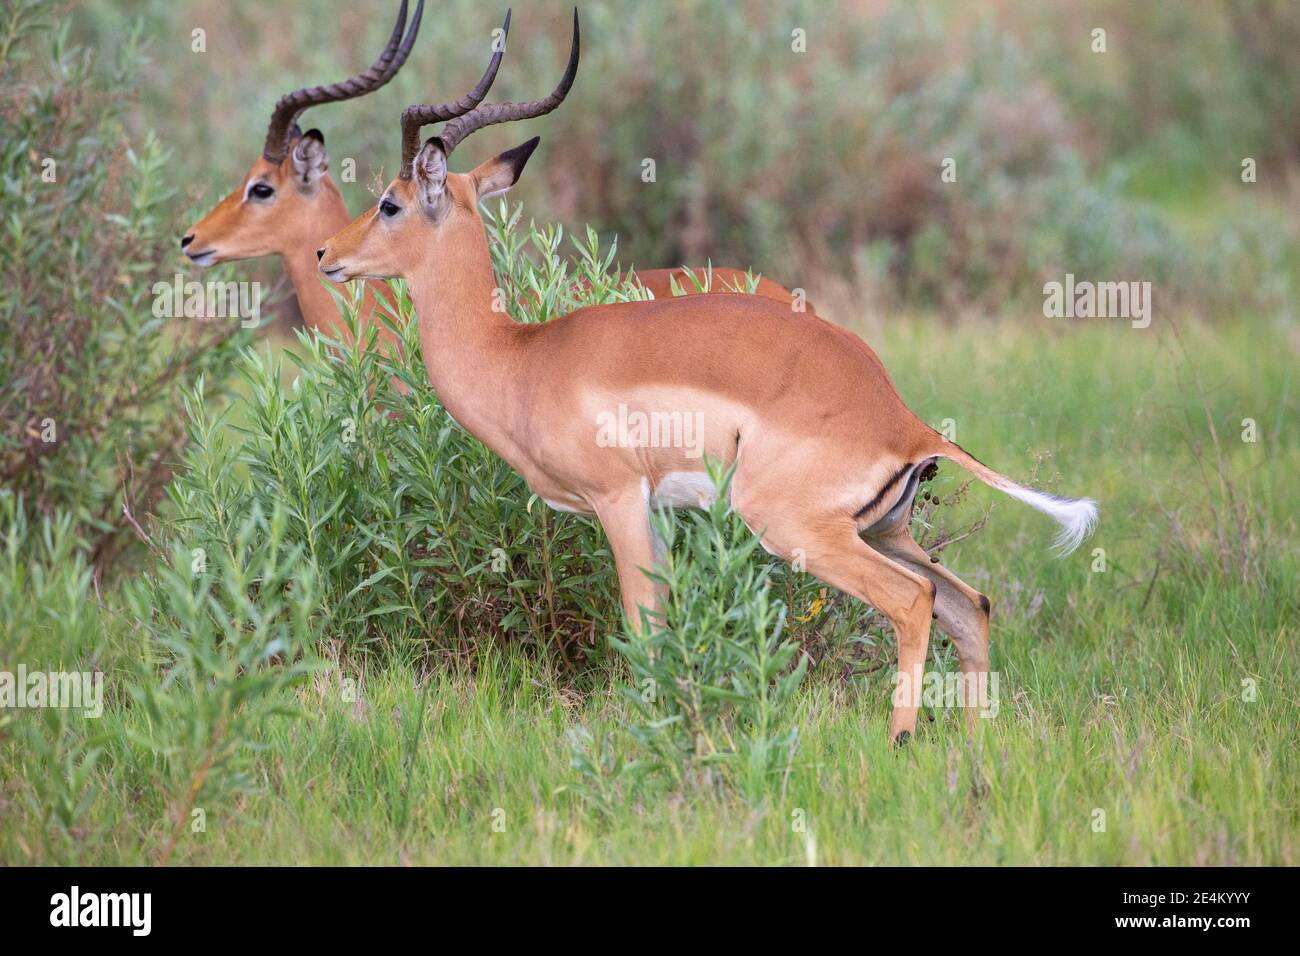 Impala (Aepyceros melampus). Horned male squatting, defecating droppings, in pellet form. Being a herbivore, poo will contain digested and partly dige Stock Photo